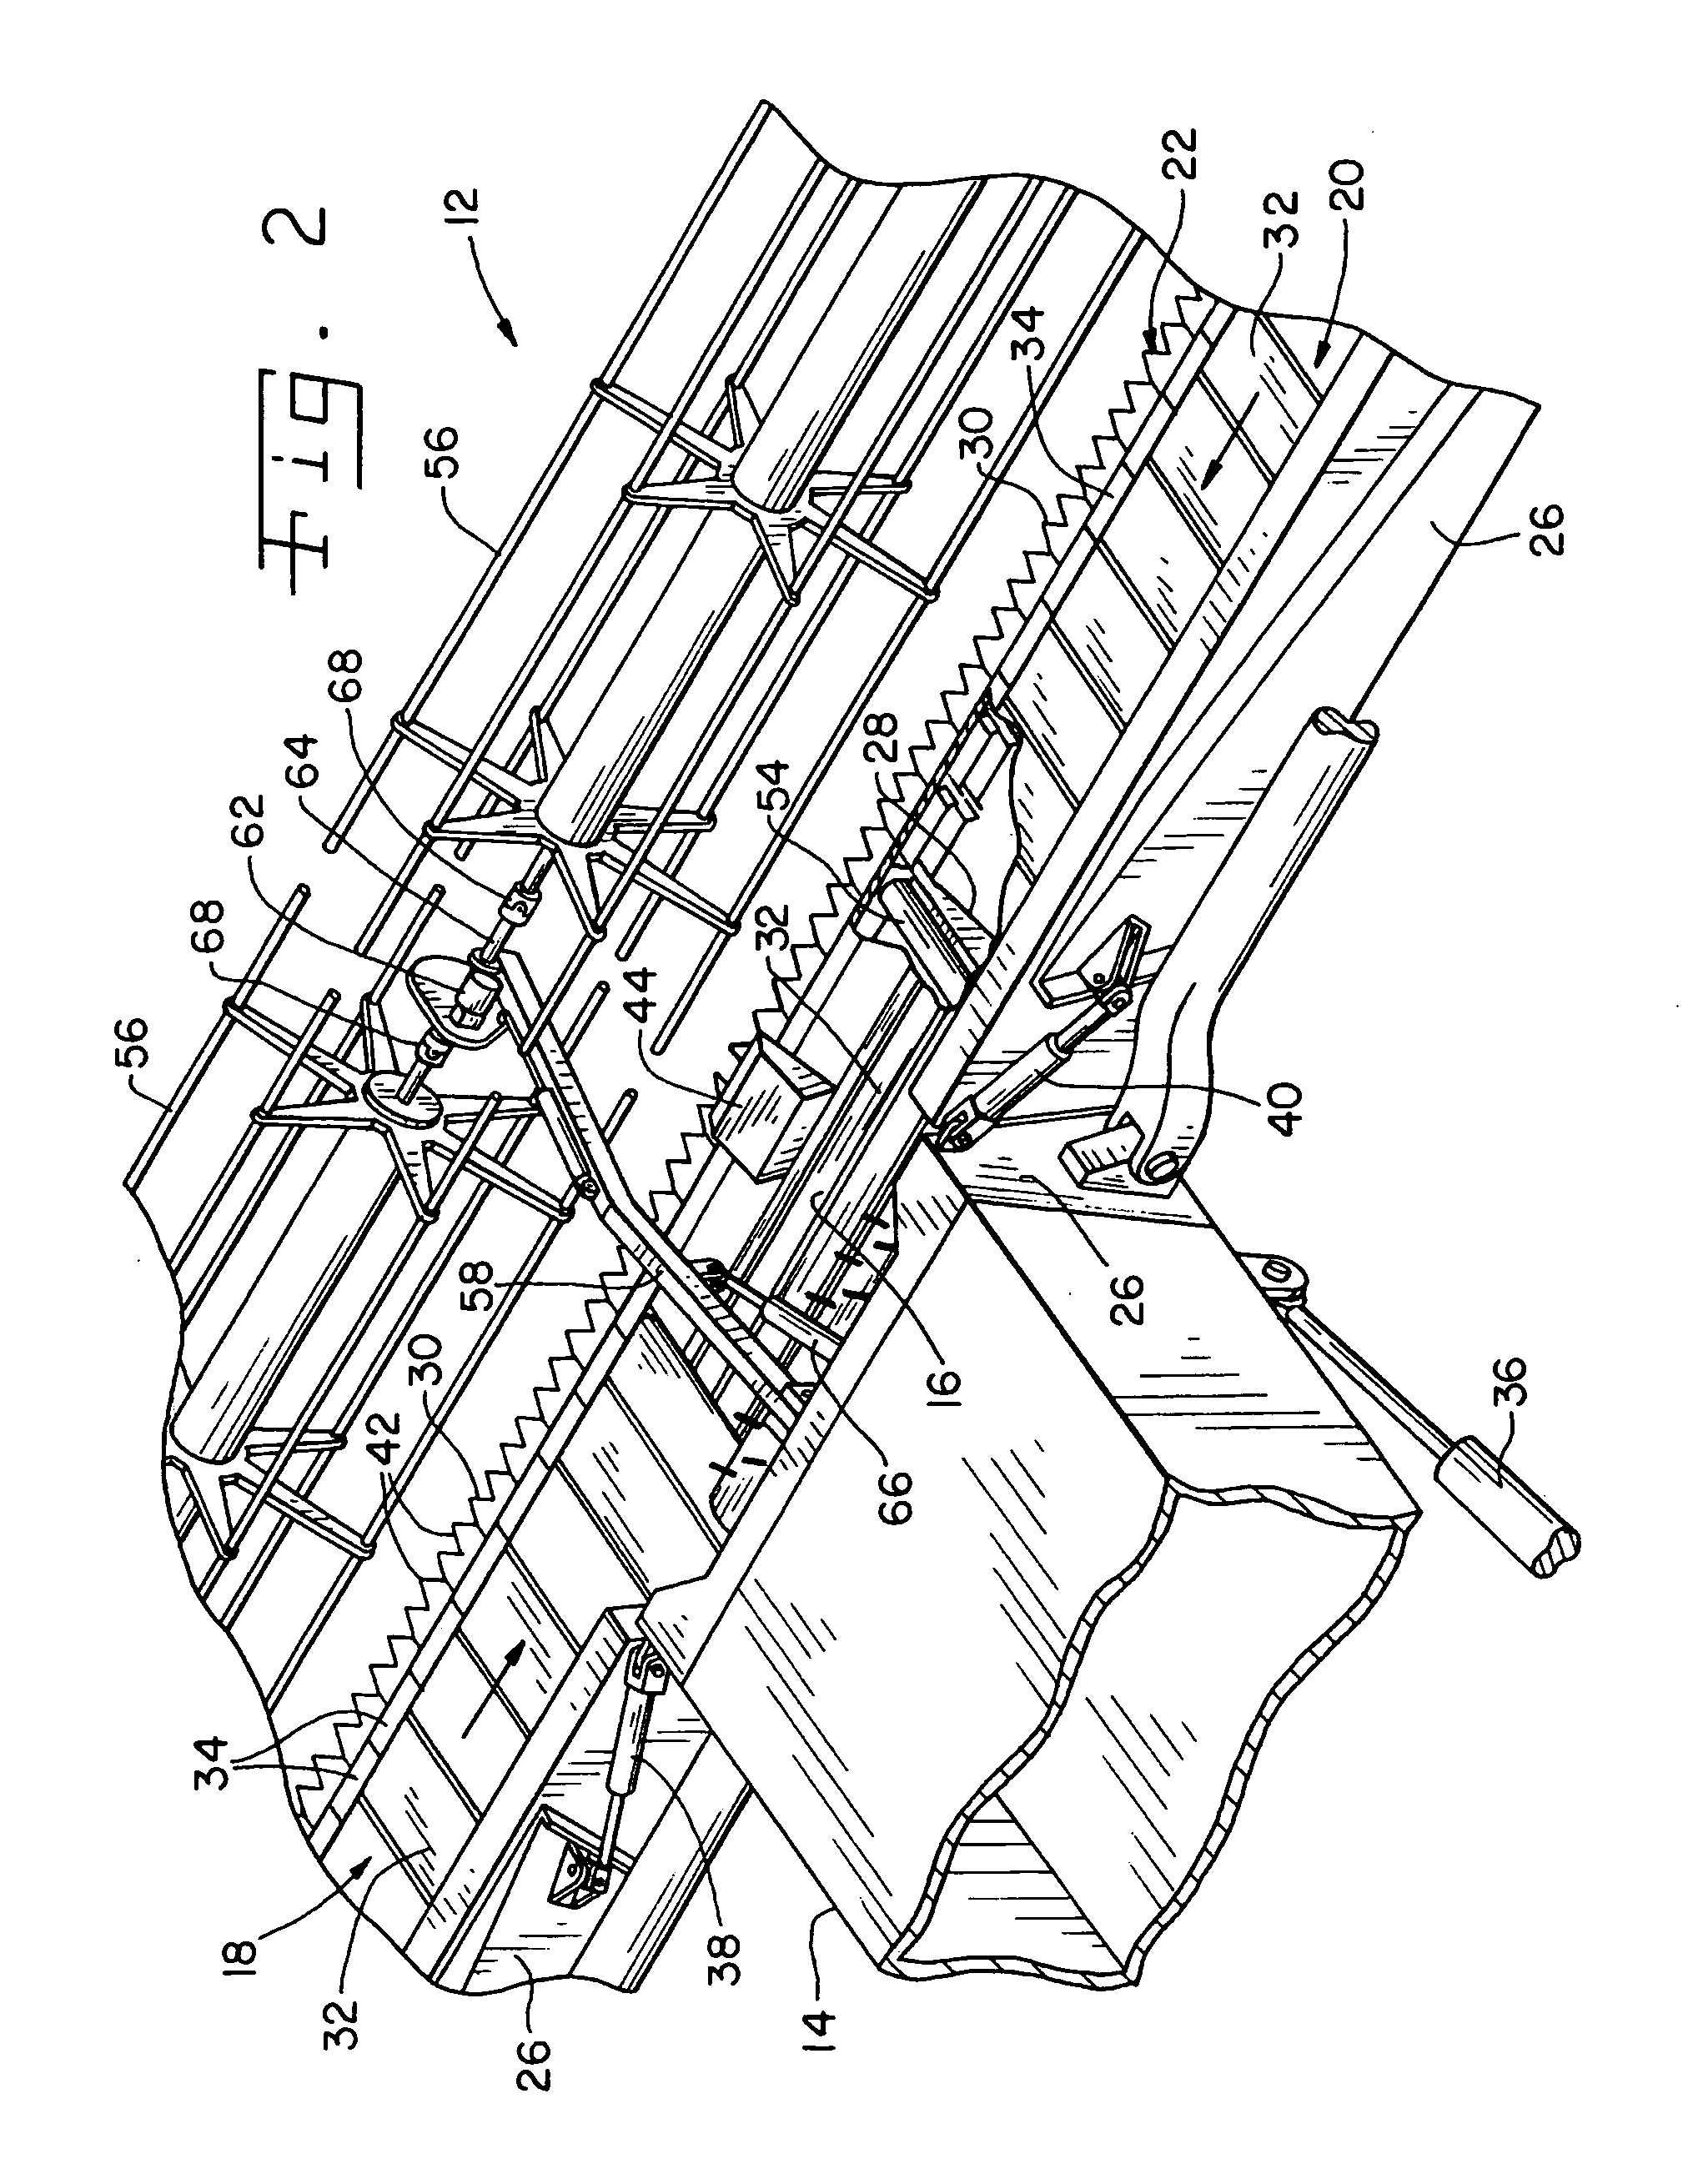 Flexible cutting platform to follow ground contour in an agricultural harvesting machine